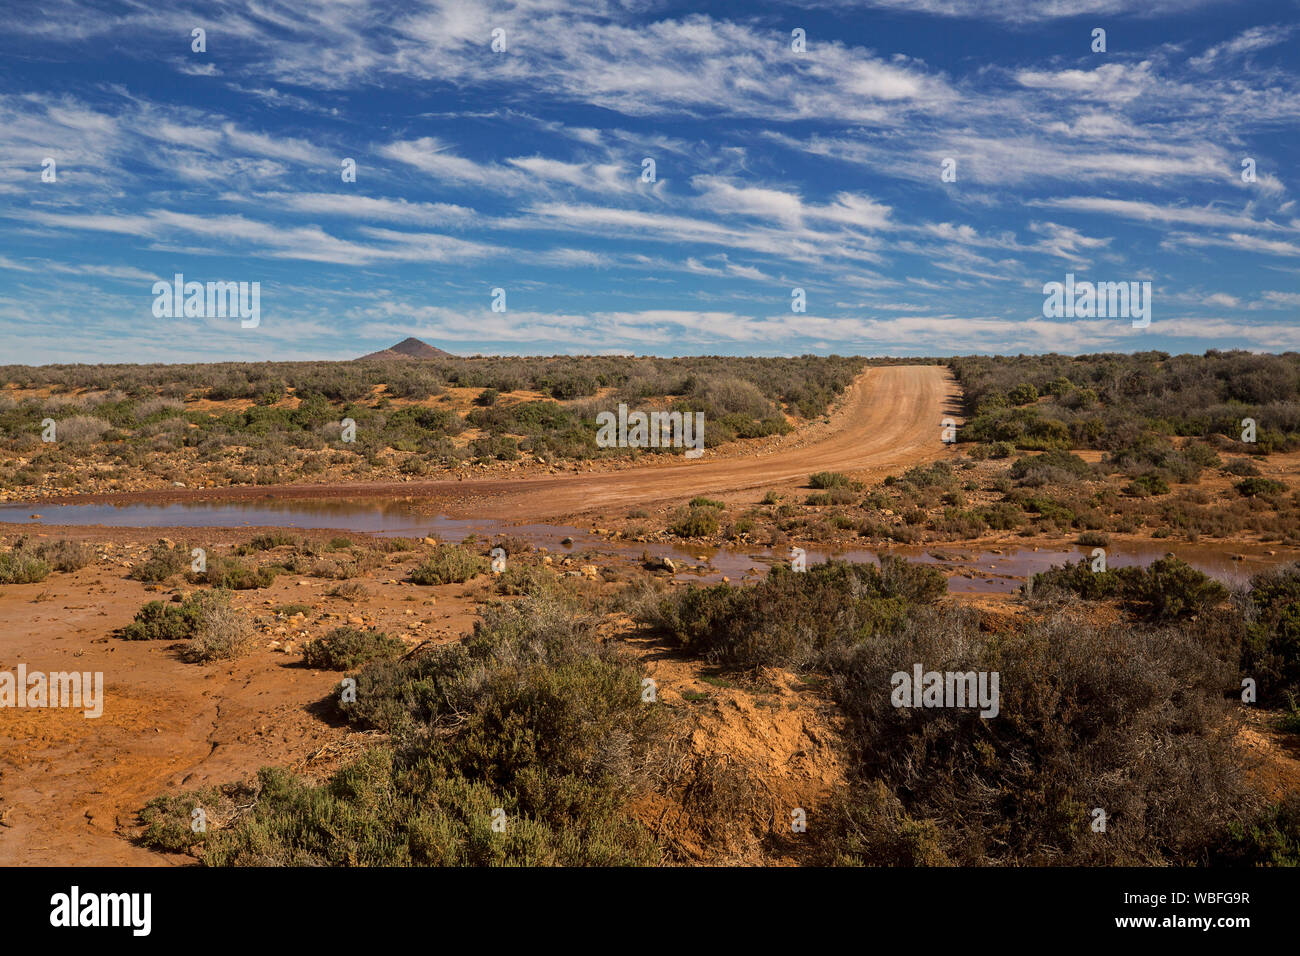 Outback landscape with red soil covered in saltbush & road crossing Willochra Creek  in Flinders Ranges region under blue sky in South Australia Stock Photo